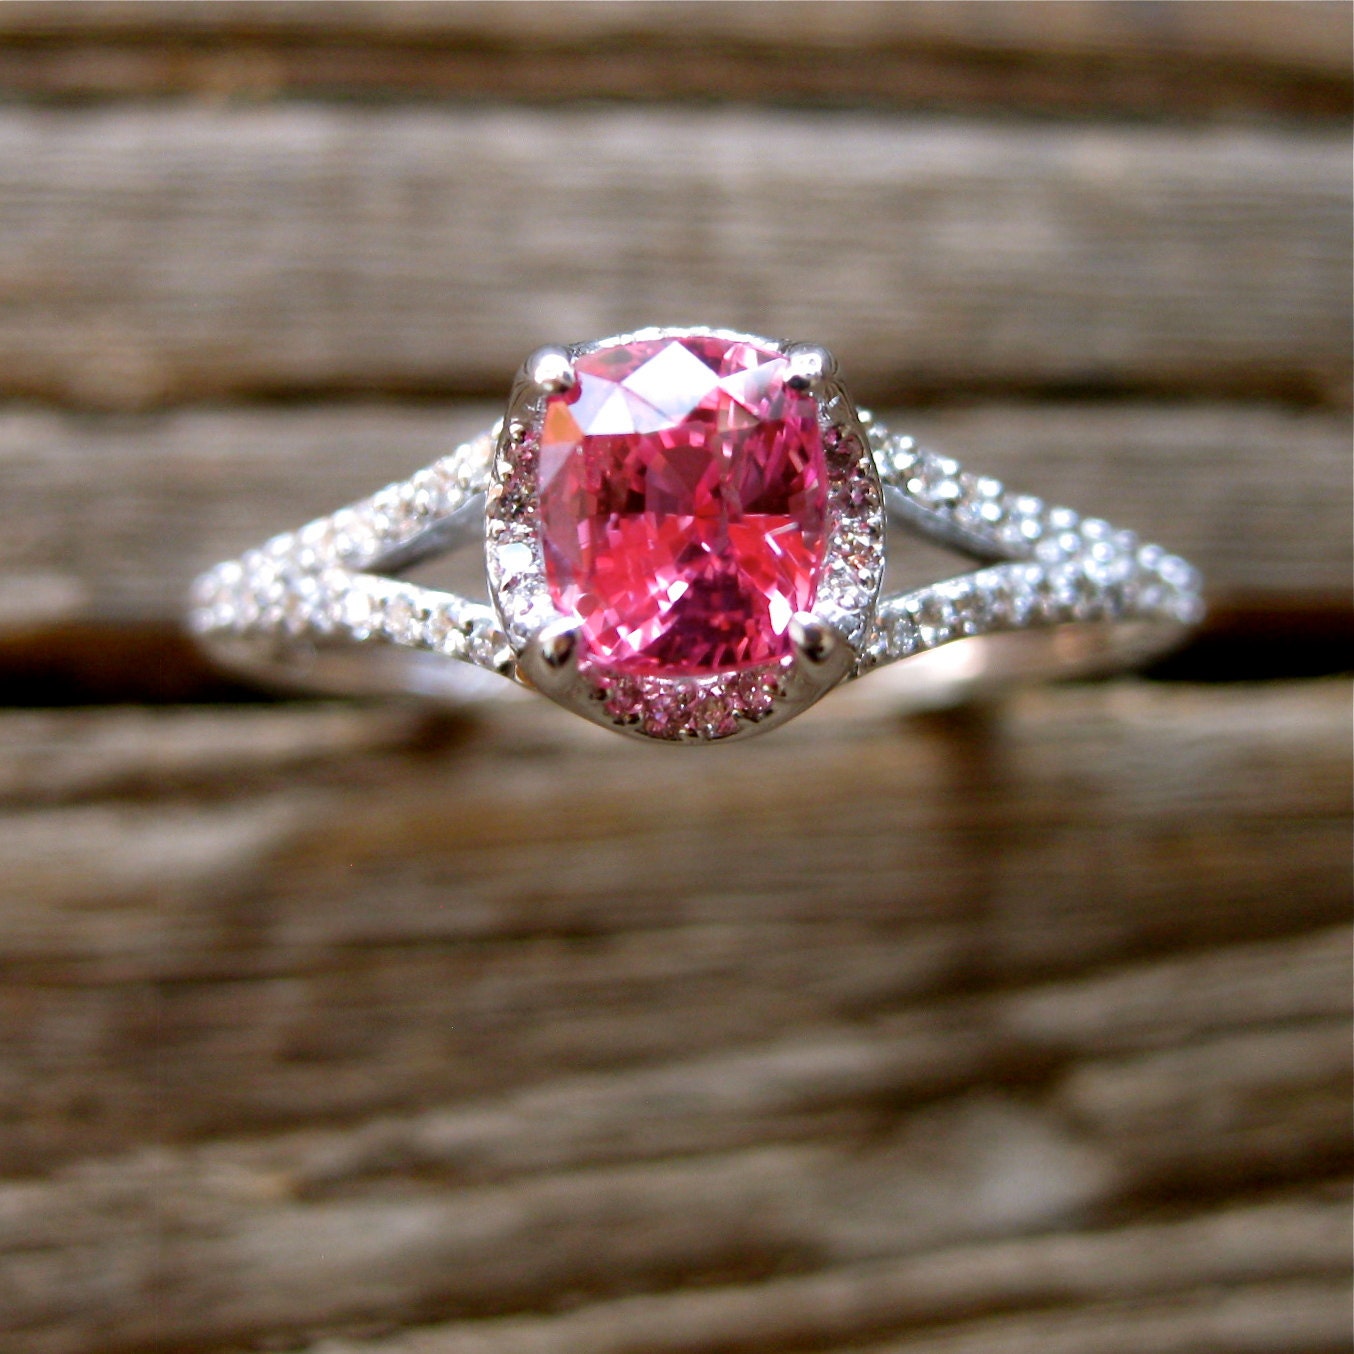 padparadscha sapphire engagement rings